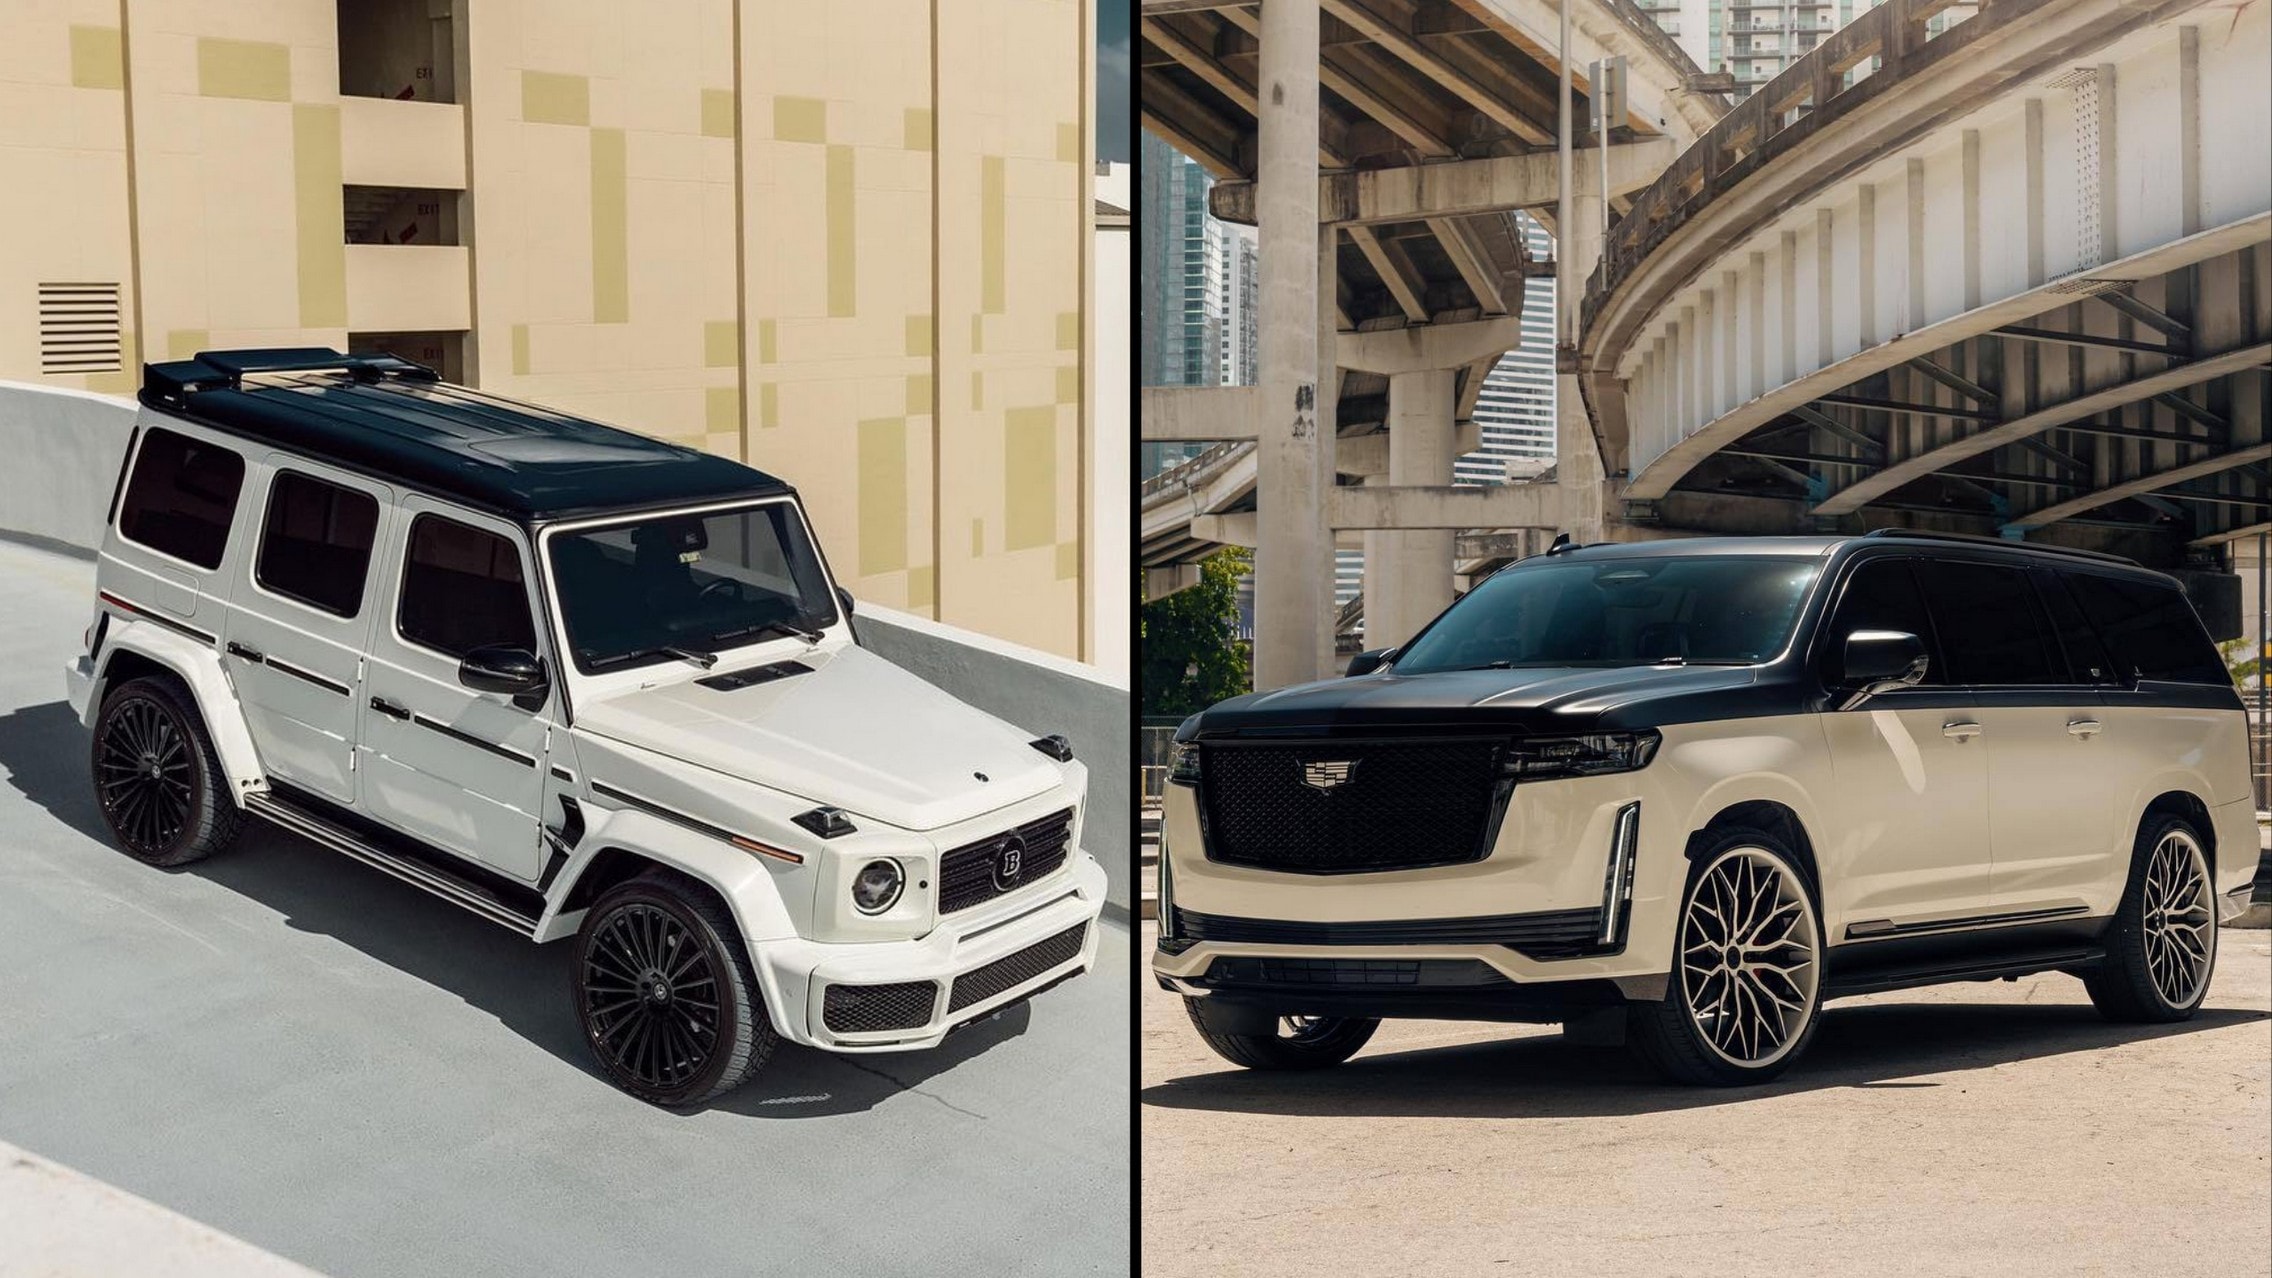 Two-Tone Escalade and G 63 Could Teach Their Rivals an Aftermarket